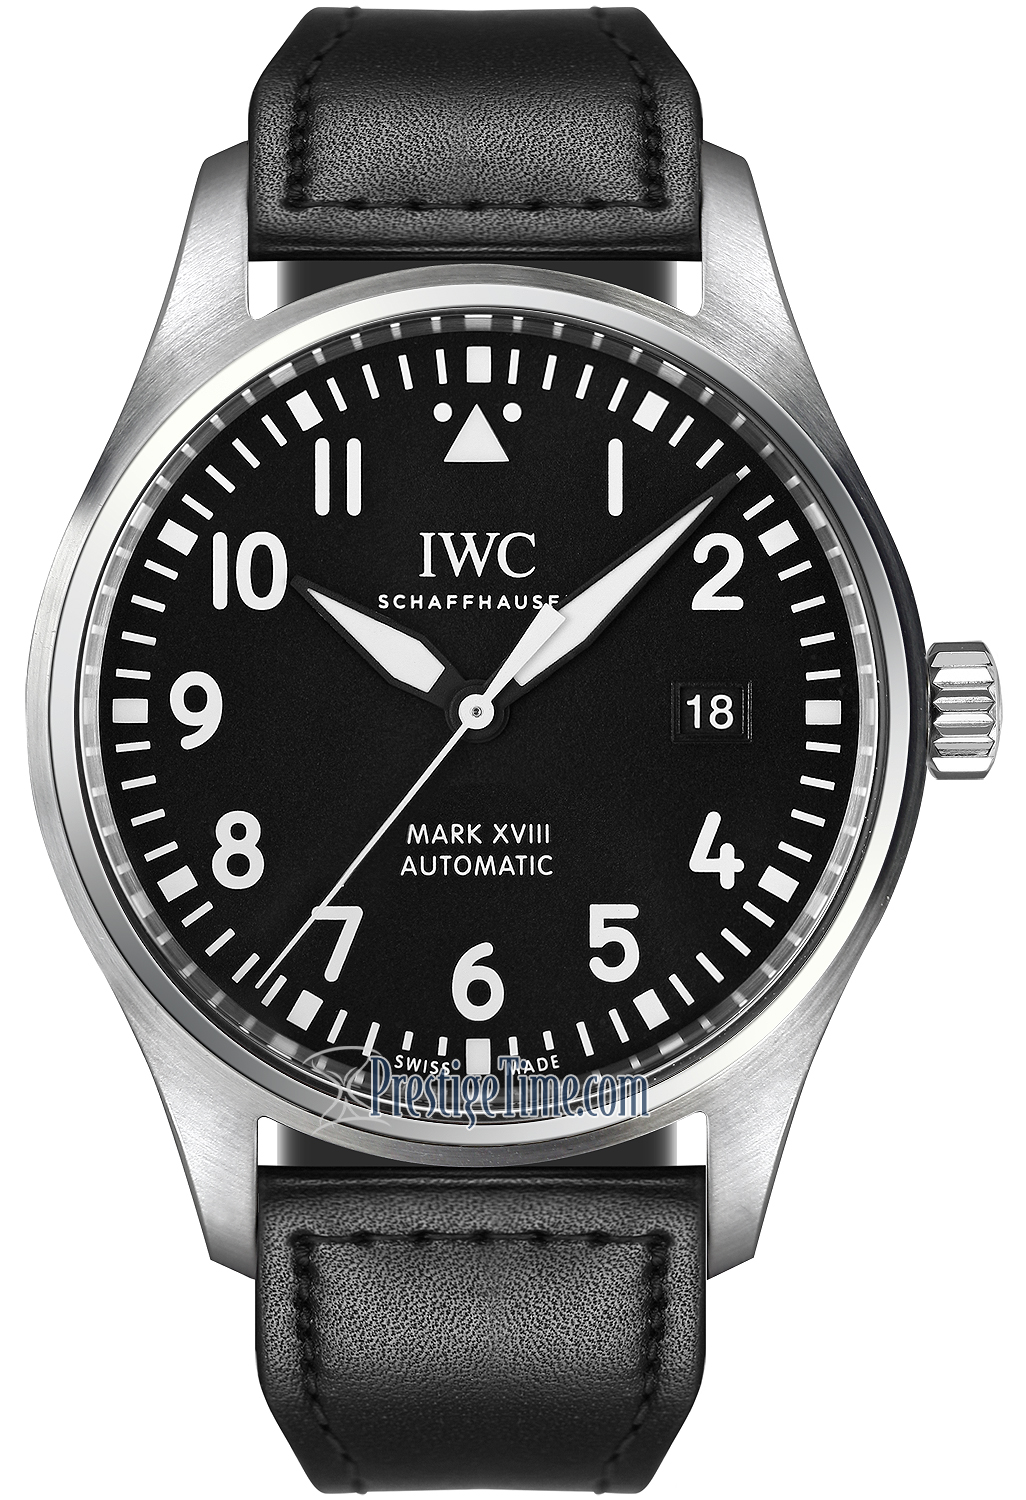 iwc watch serial number check